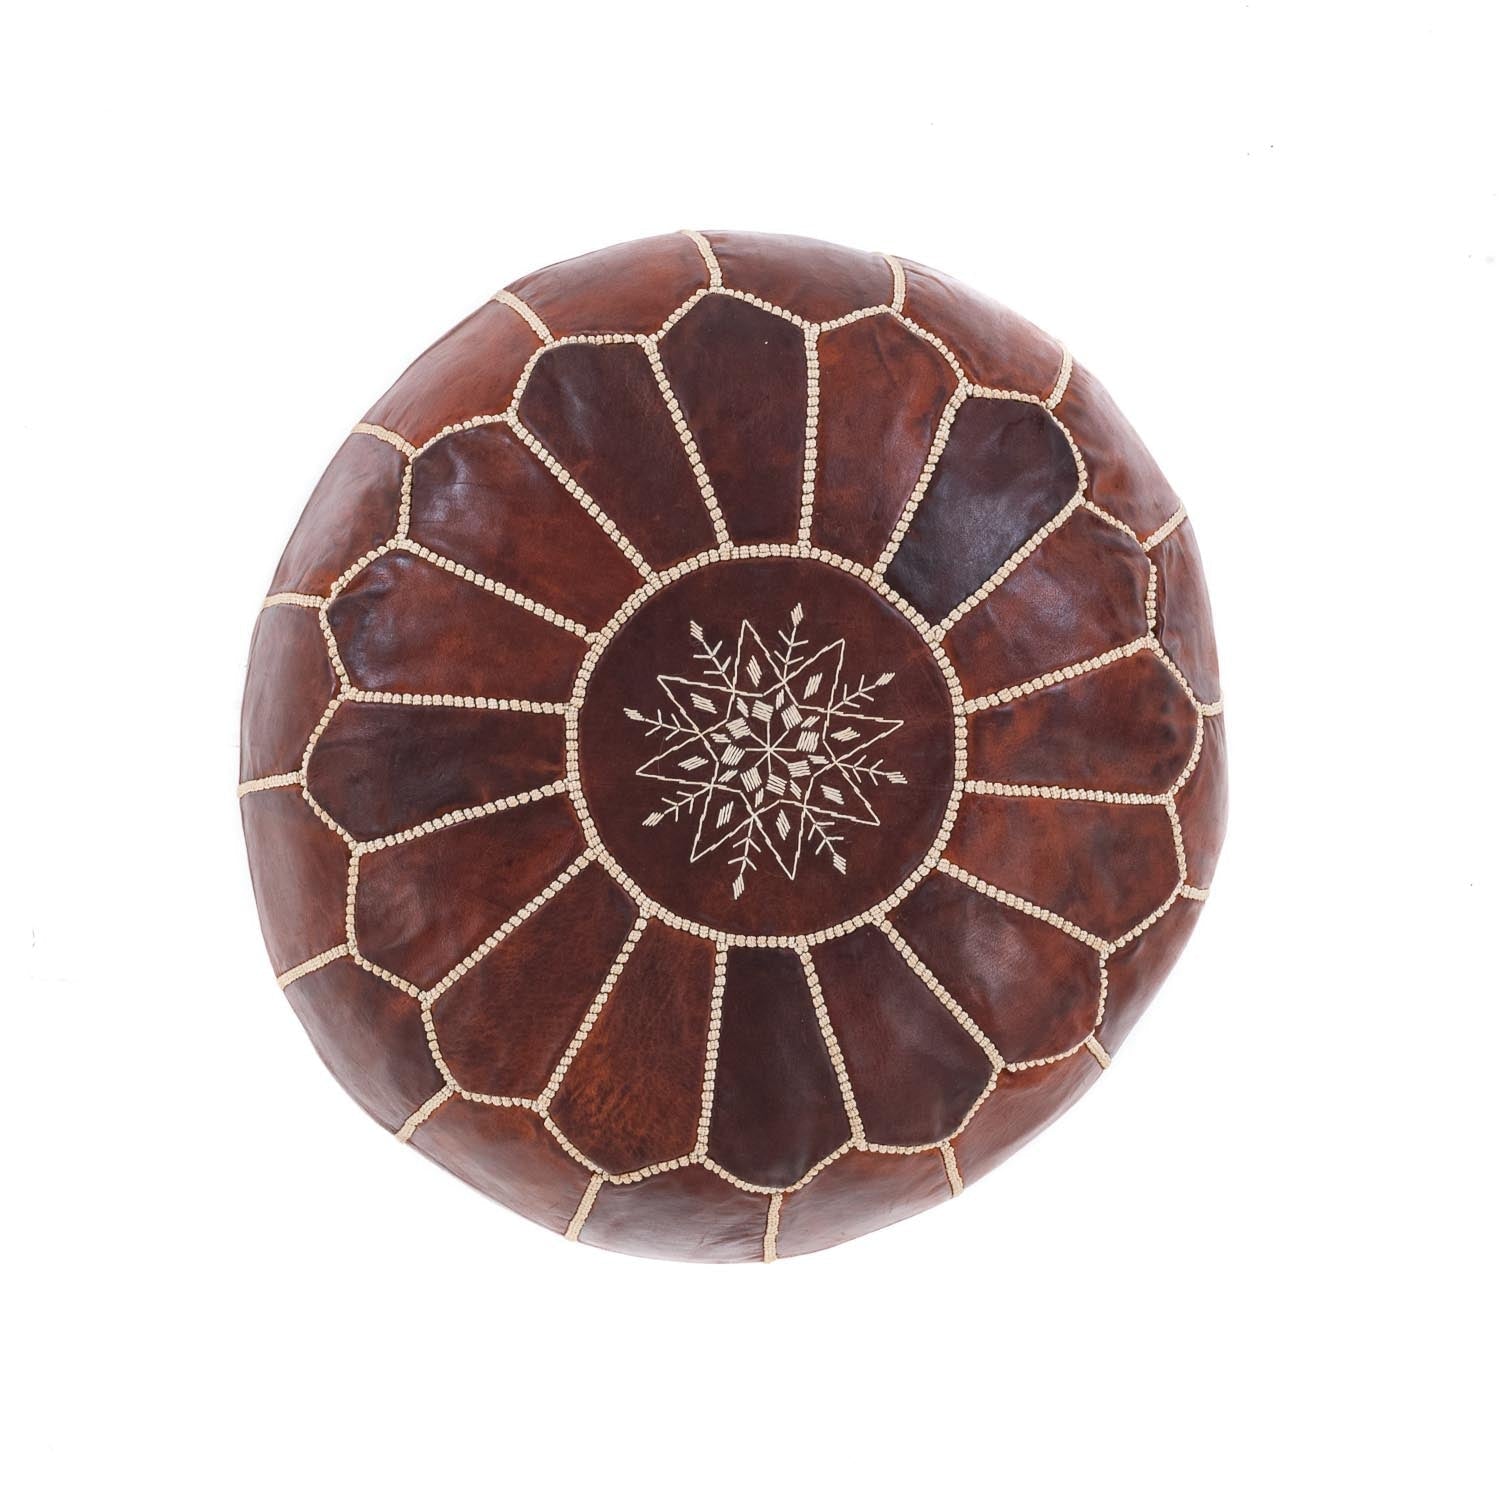 Authentic Moroccan Leather Pouf - Chocolate - Benisouk